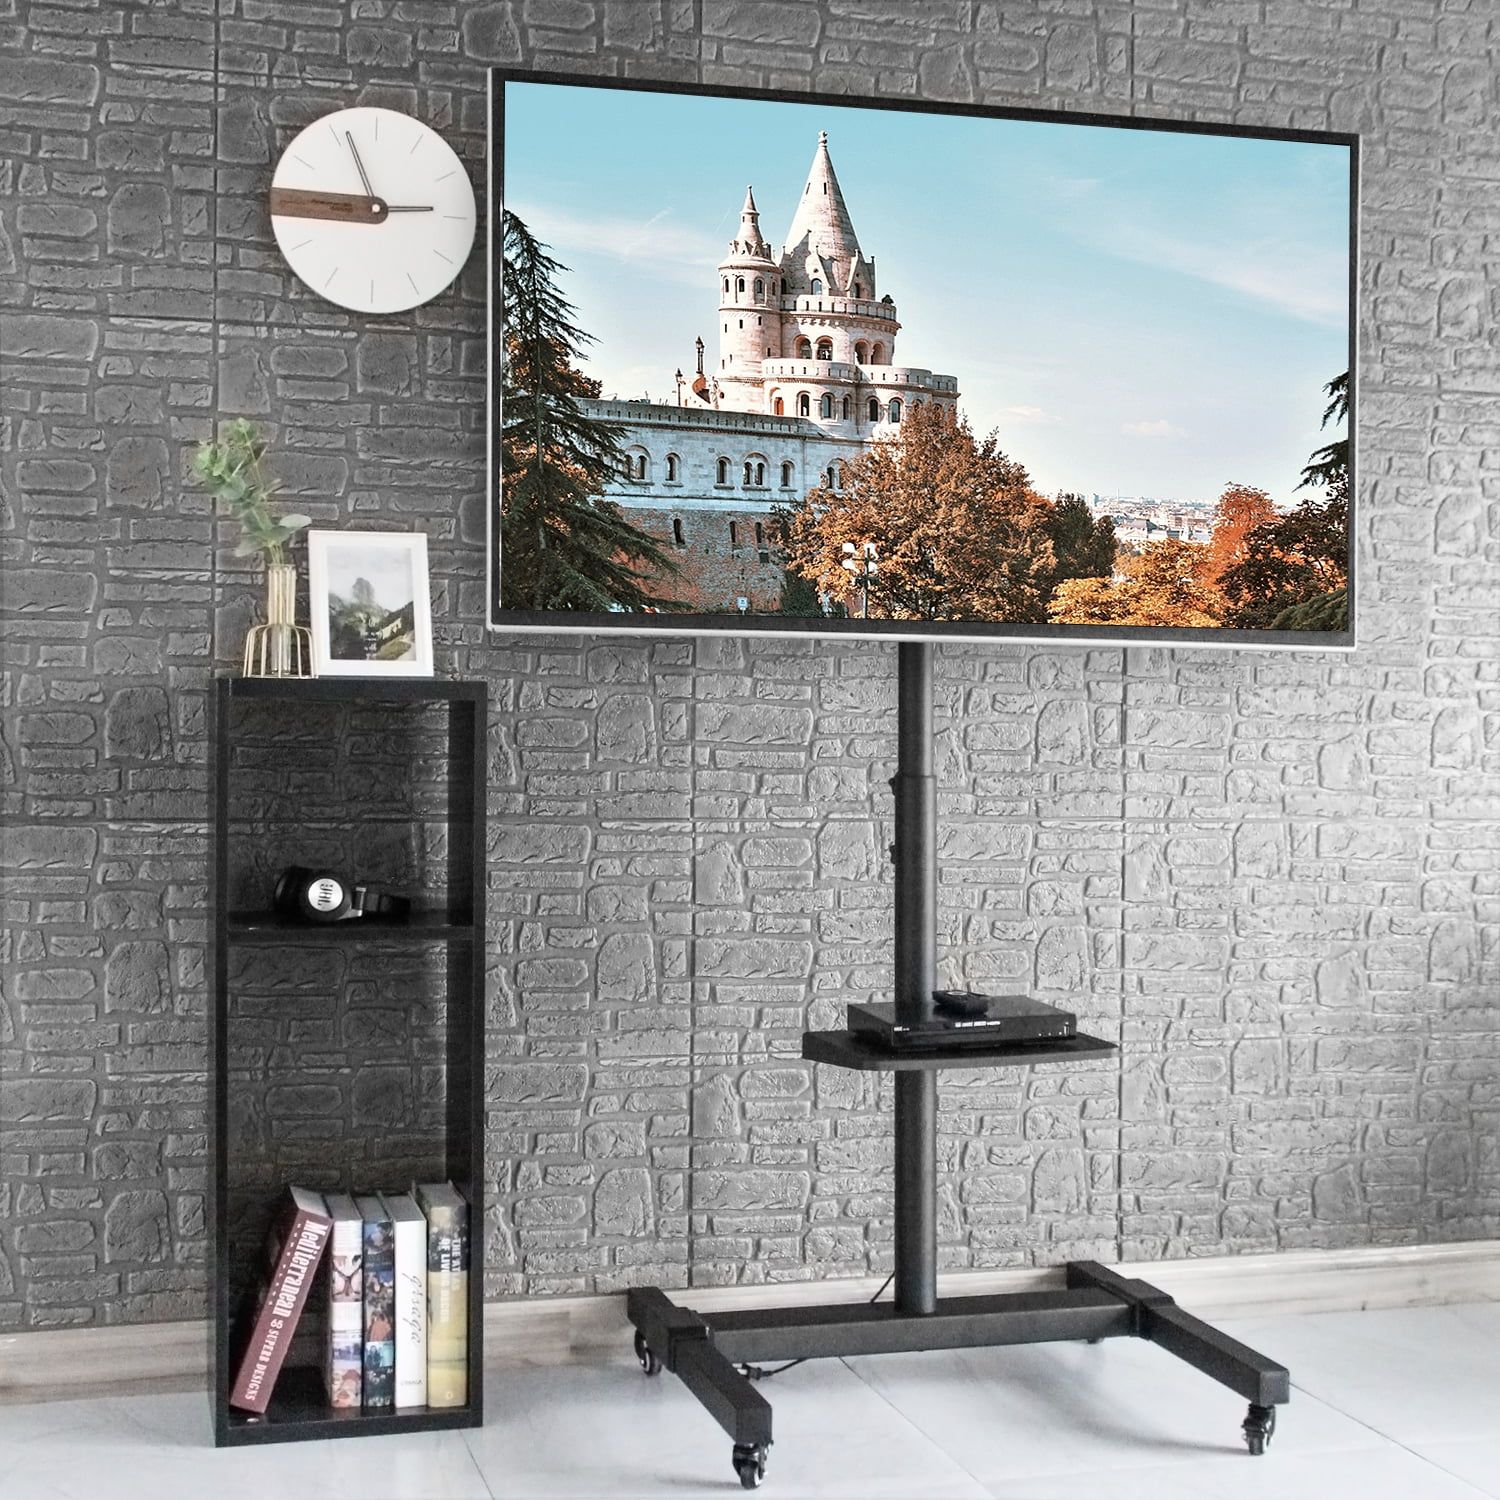 Modern 65 To 70 Inch Tv Stand Rolling Tv Cart Home, Black – Walmart With Modern Rolling Tv Stands (Gallery 4 of 20)